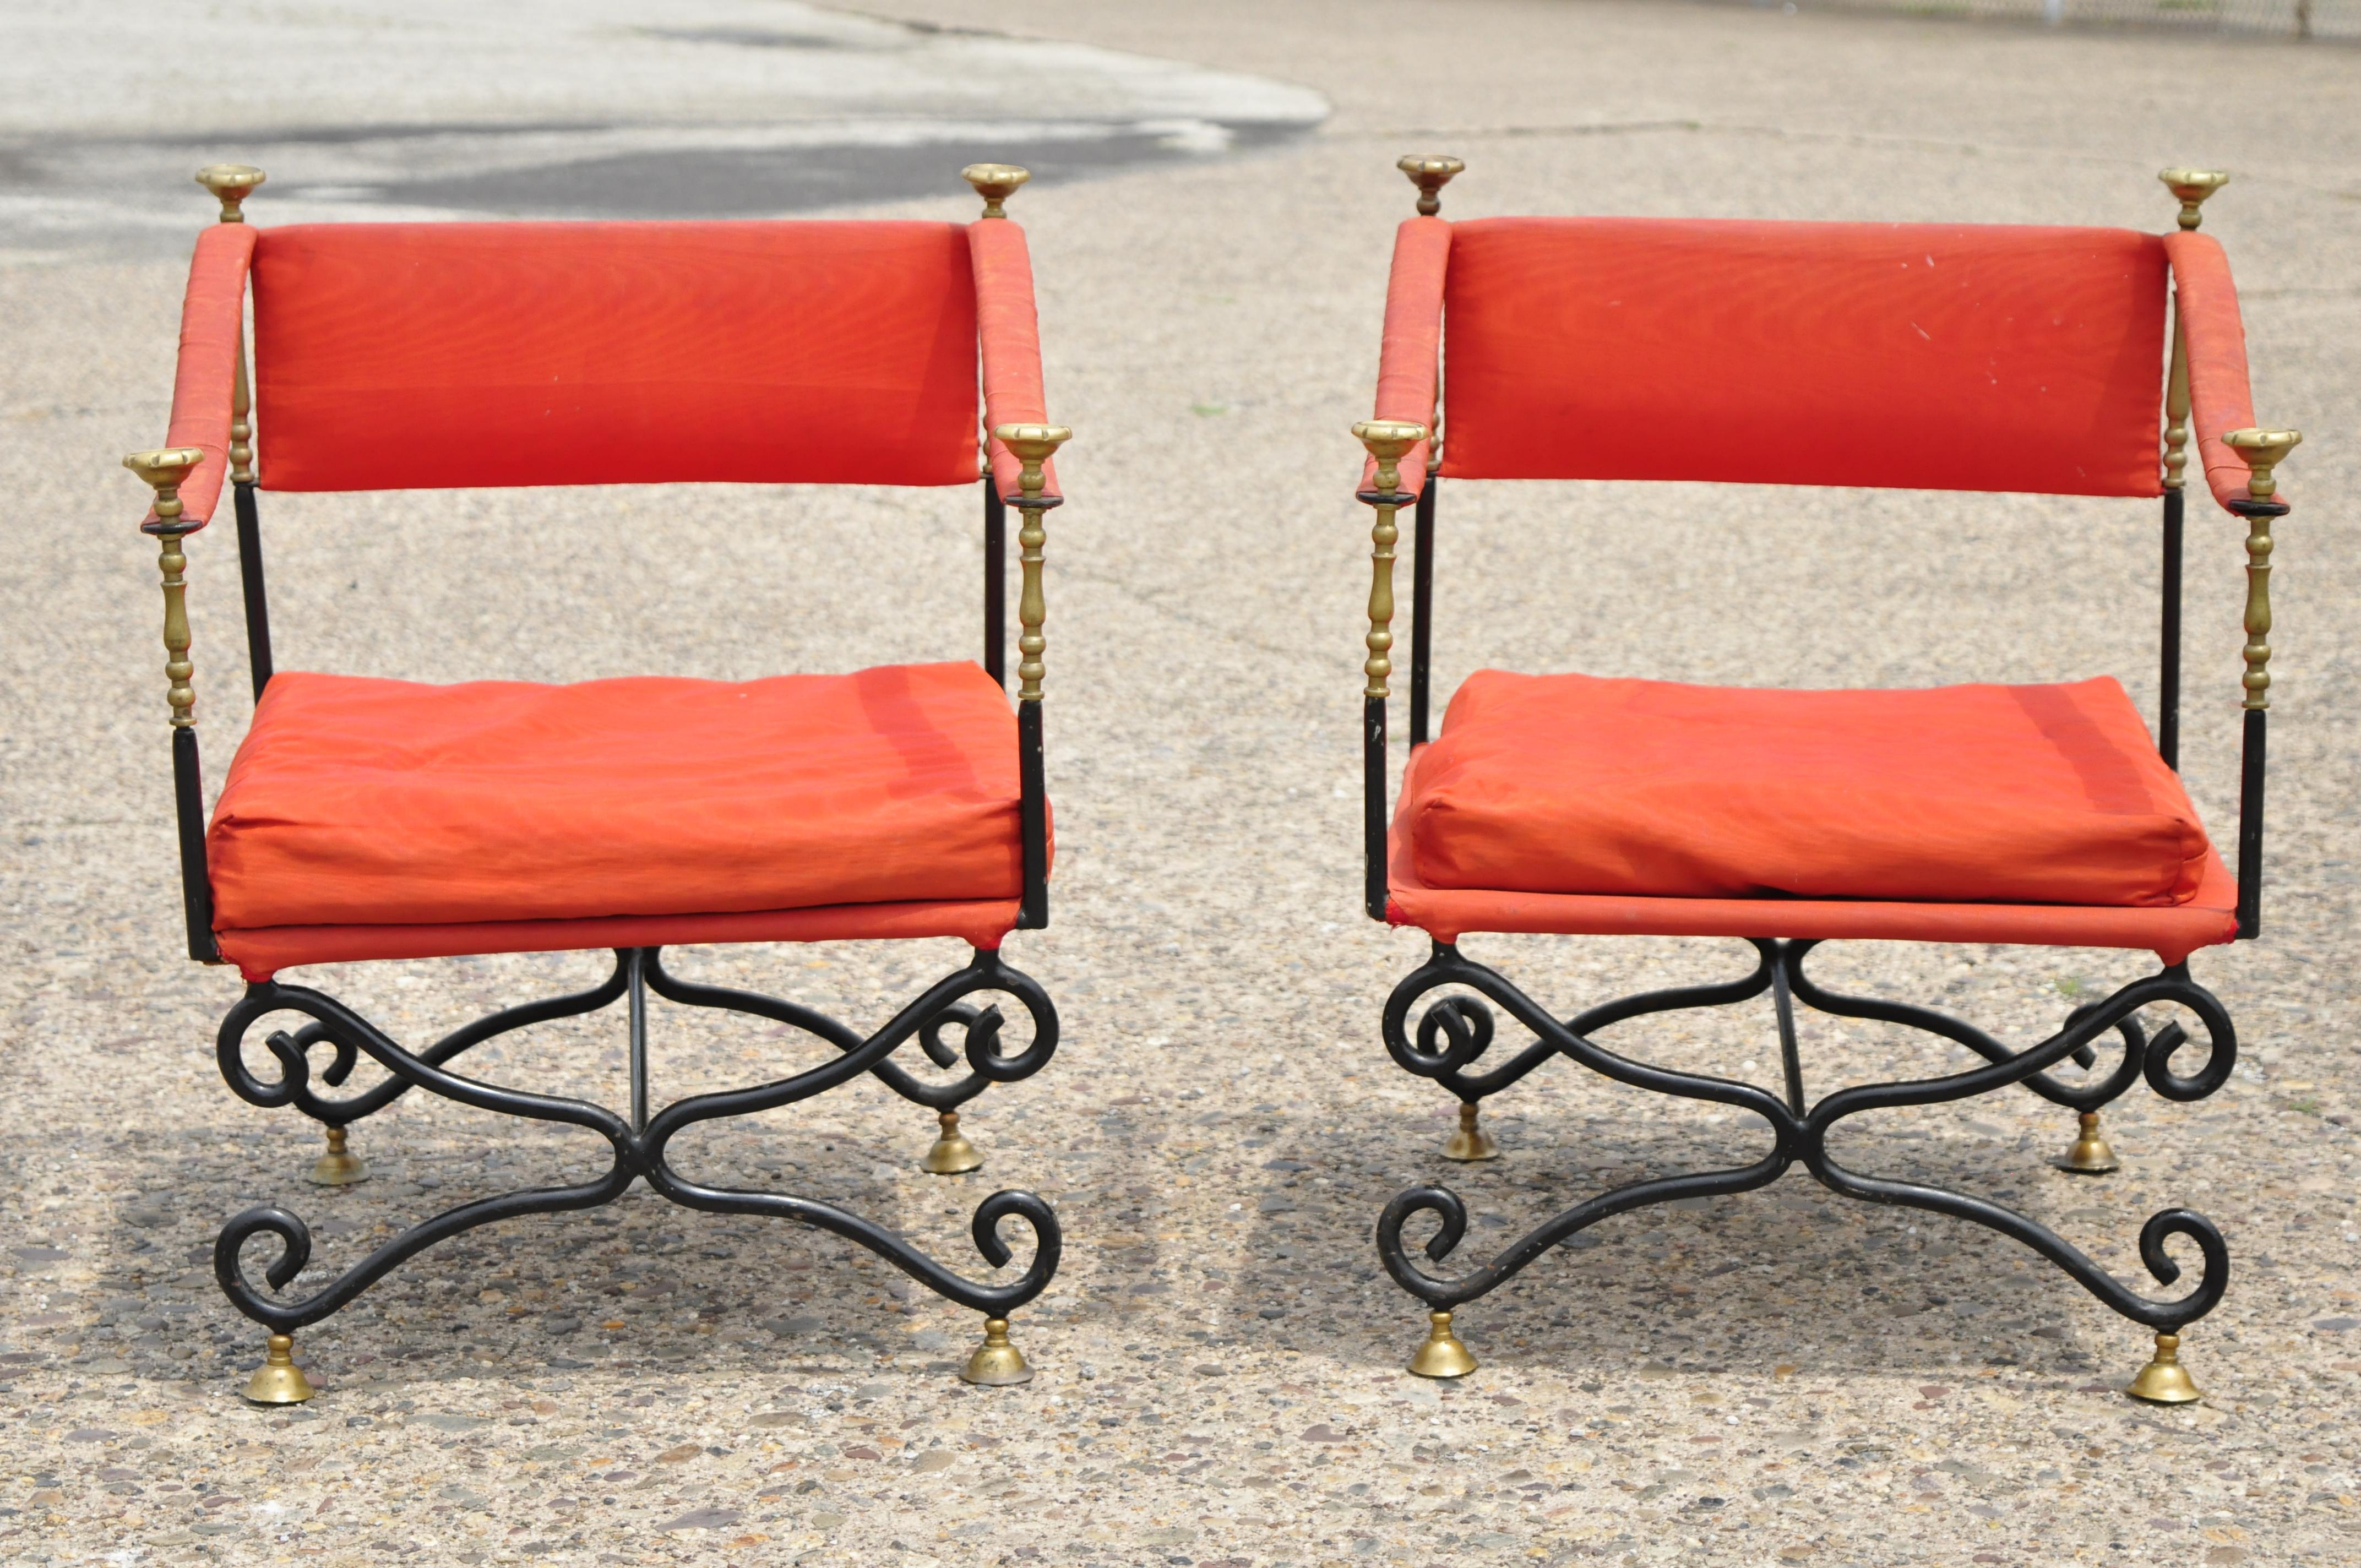 Vintage Italian Regency Savonarola Curule wrought iron throne lounge chairs - a Pair. Item features curule x-form frames, solid brass finials and 